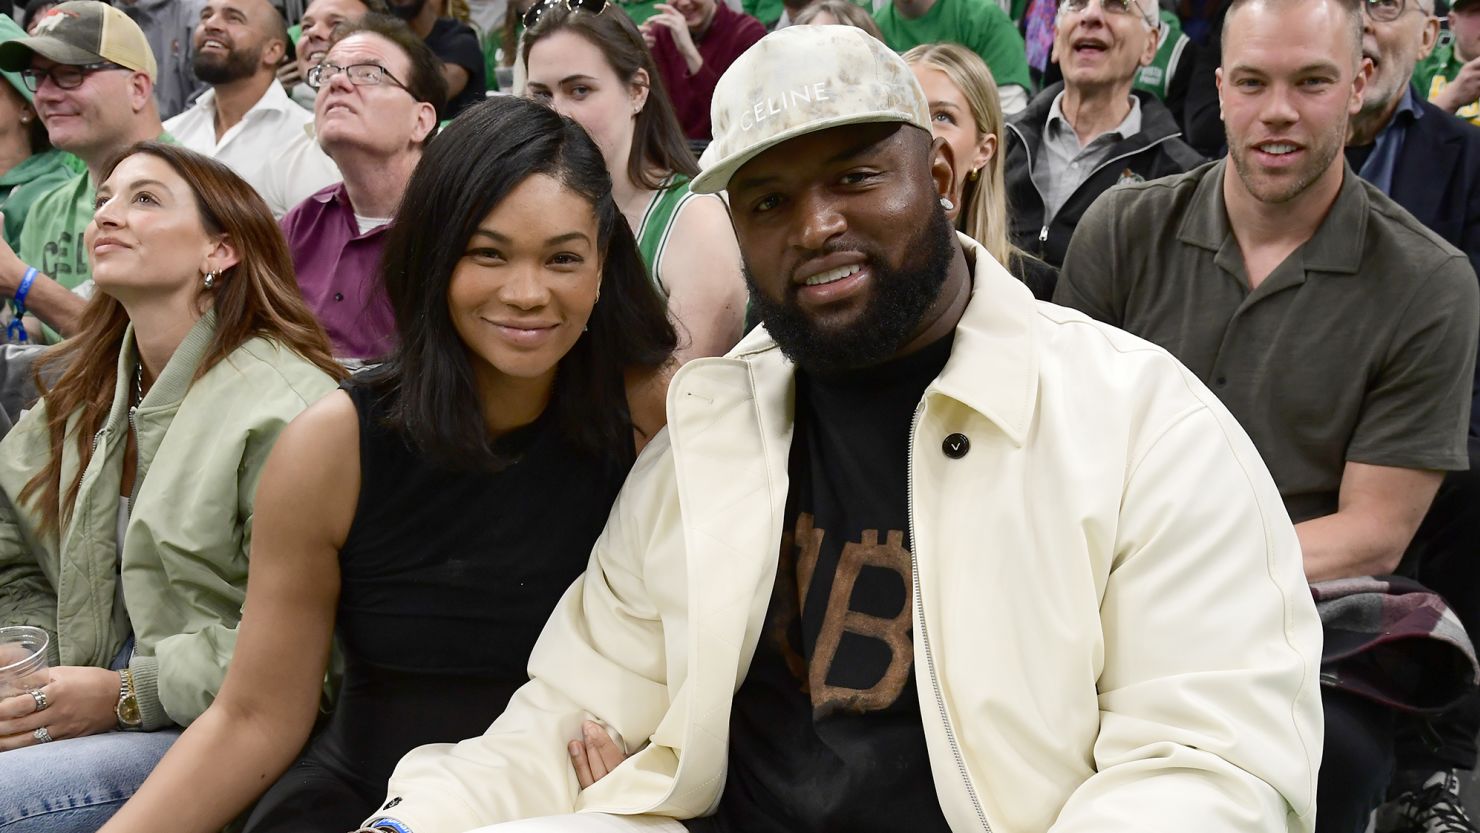 BOSTON, MA - MAY 17: Chanel Iman and Davon Godchaux attend a game between the Miami Heat  and the Boston Celtics during Game 1 of the Eastern Conference Finals 2023 NBA Playoffs on May 17, 2023 at the TD Garden in Boston, Massachusetts. NOTE TO USER: User expressly acknowledges and agrees that, by downloading and or using this photograph, User is consenting to the terms and conditions of the Getty Images License Agreement. Mandatory Copyright Notice: Copyright 2023 NBAE  (Photo by Brian Babineau/NBAE via Getty Images)